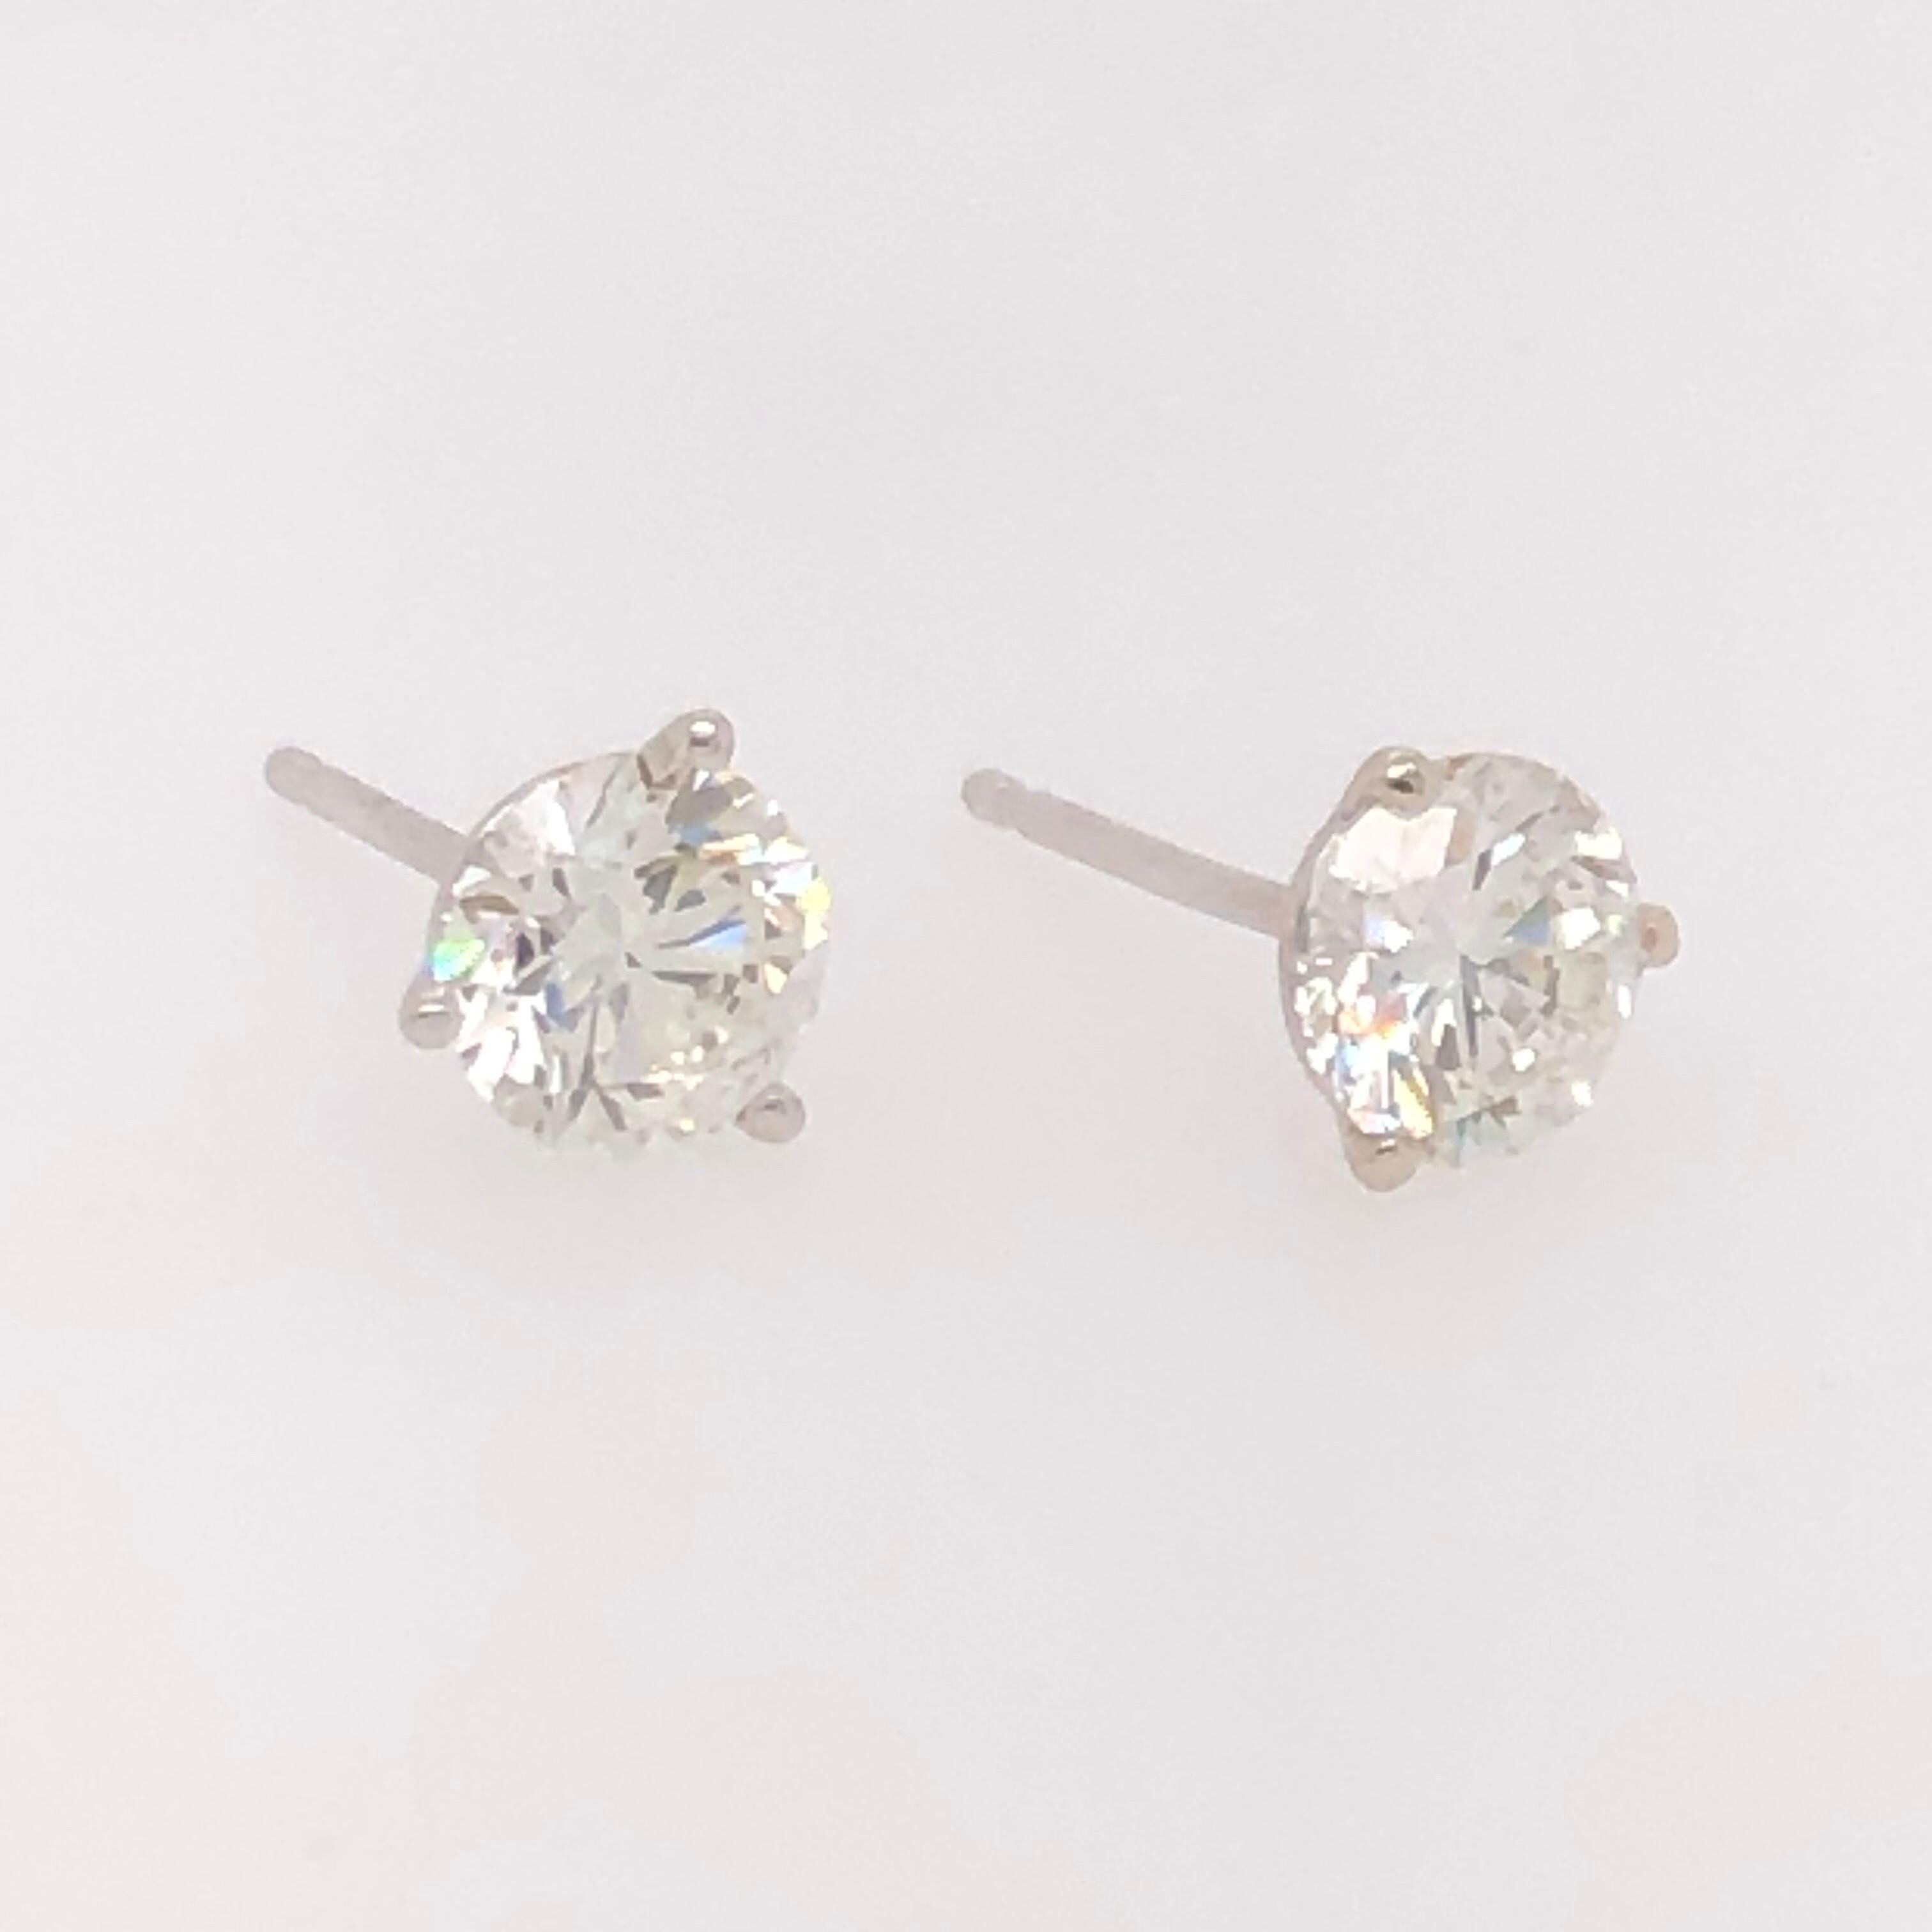 A timeless pair of diamond studs is a staple in women's (and men's) wardrobes. An appropriate gift for academic achievements or rights of passage, diamonds studs are a must have. 

Diamonds are graded on cut, color, clarity, and carat weight. Better